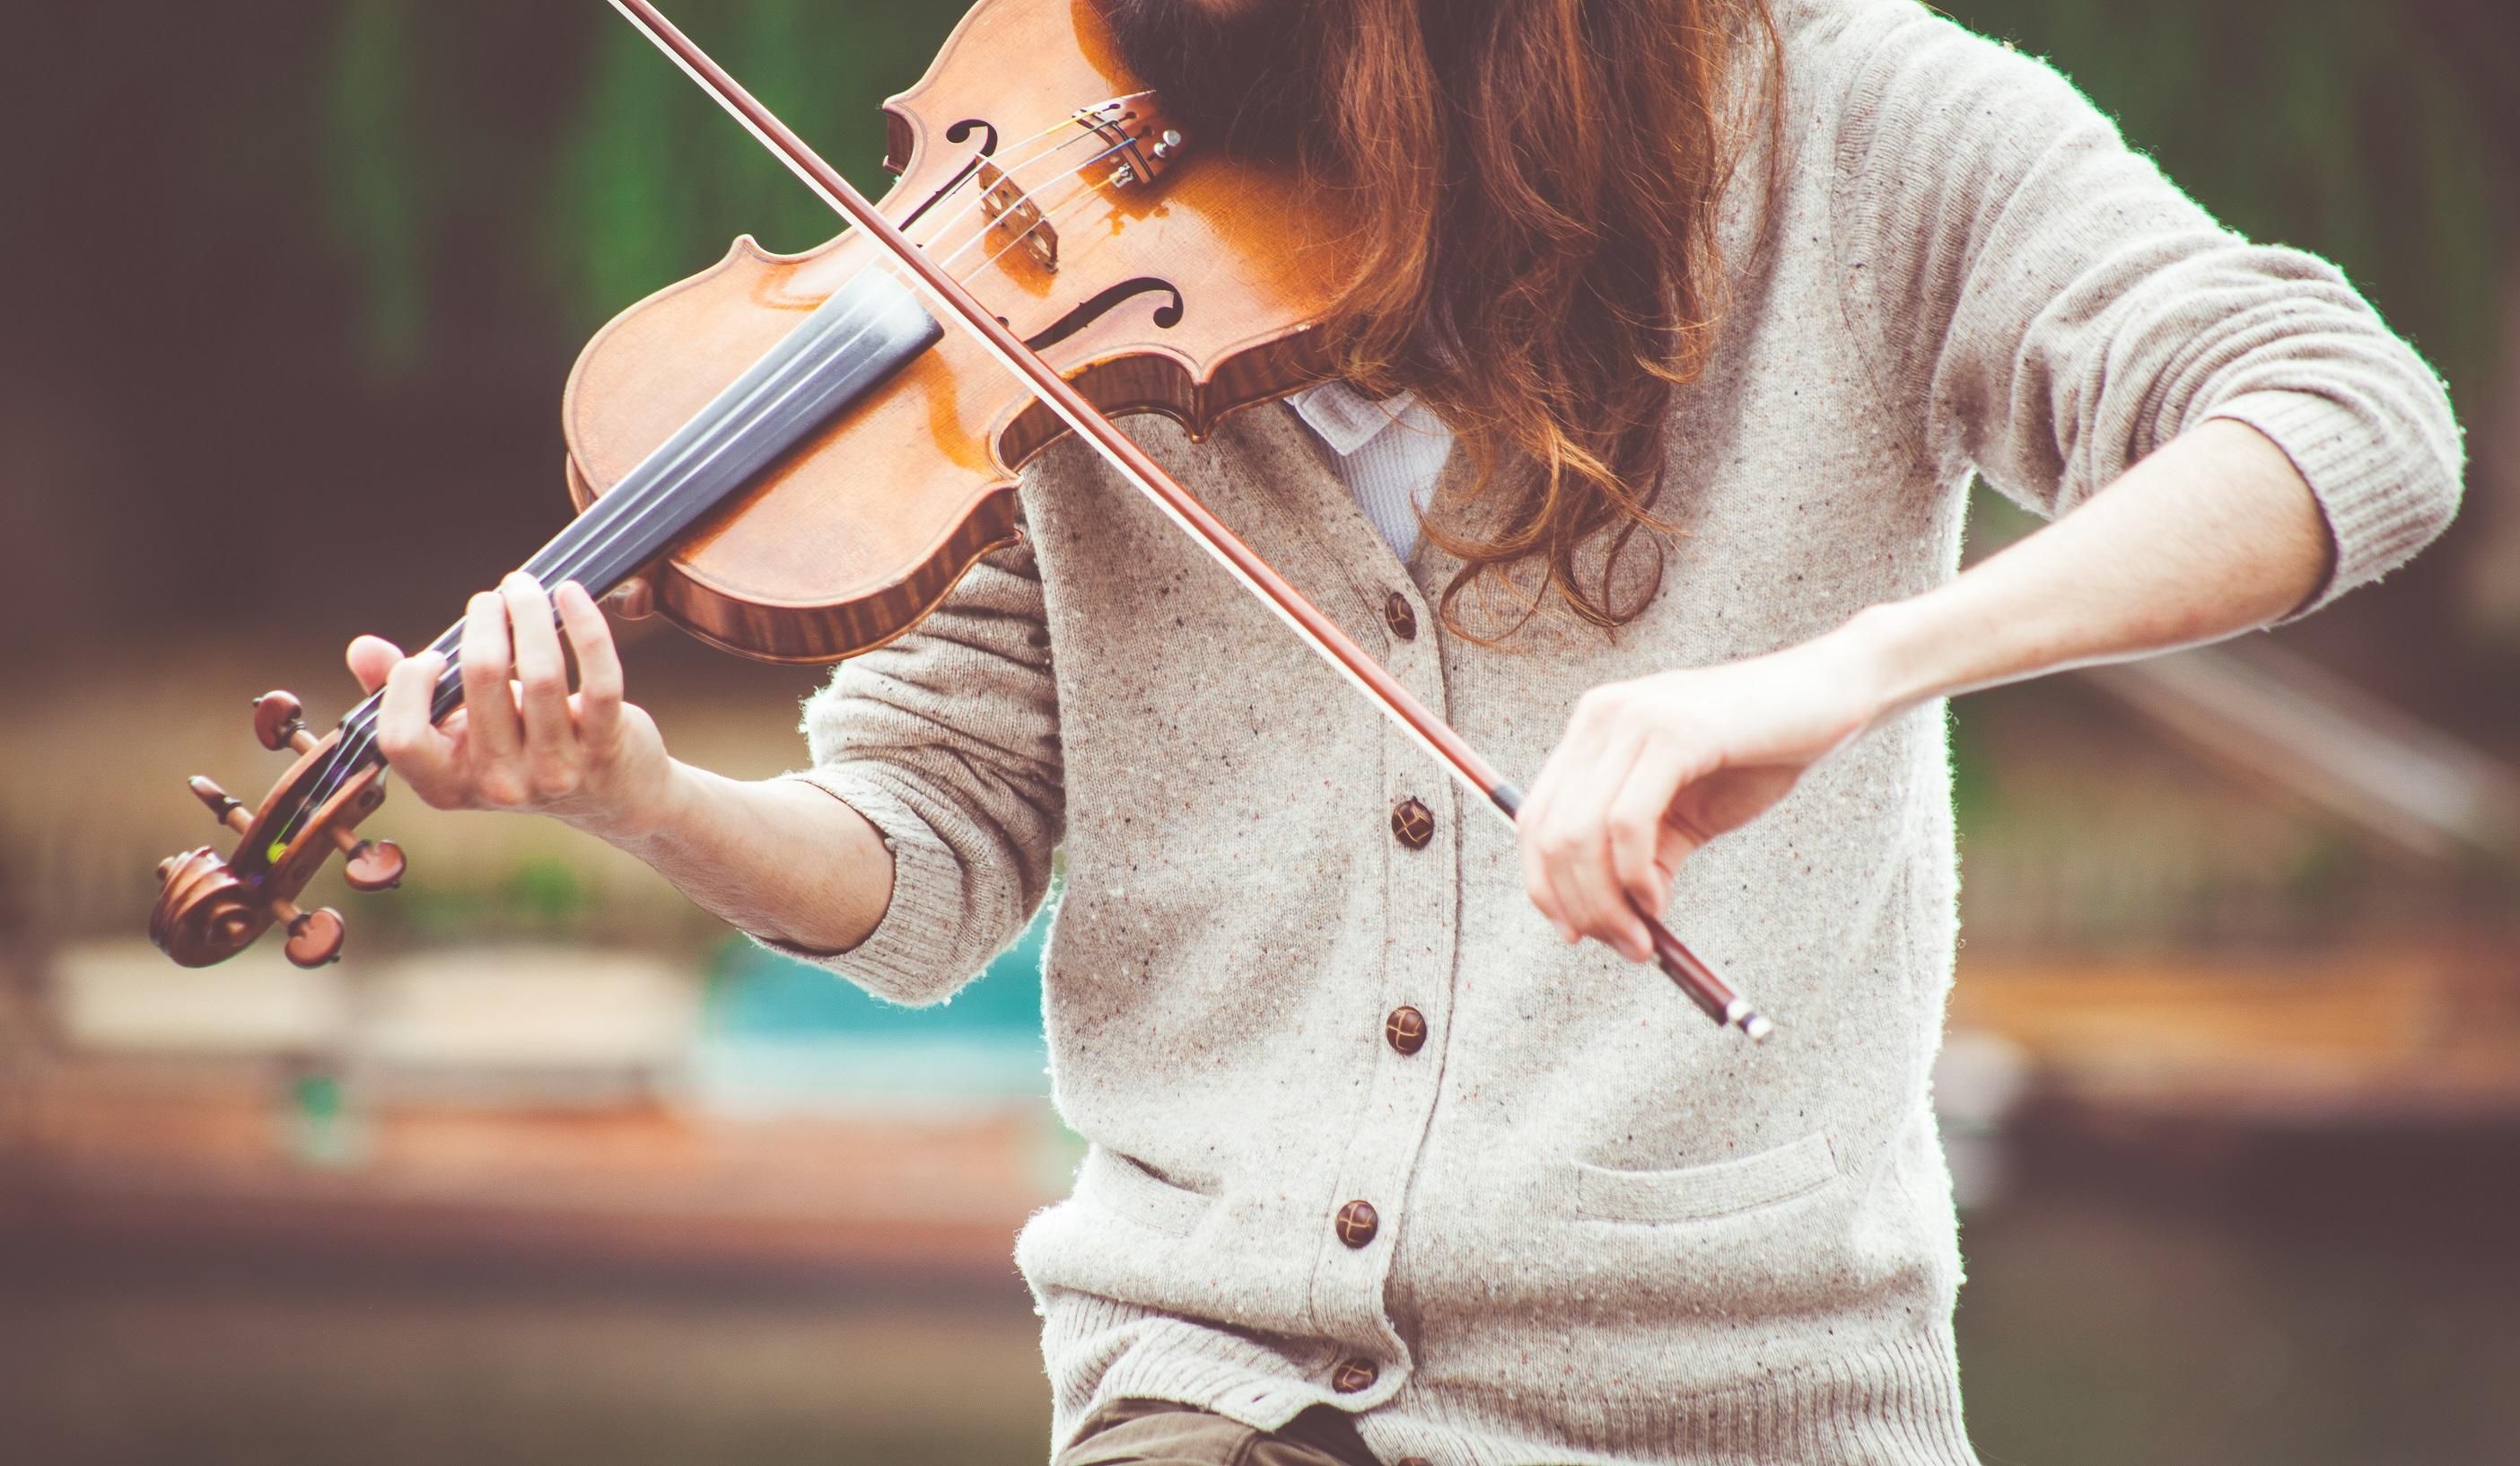 Want to learn to play the Violin but don't have one?